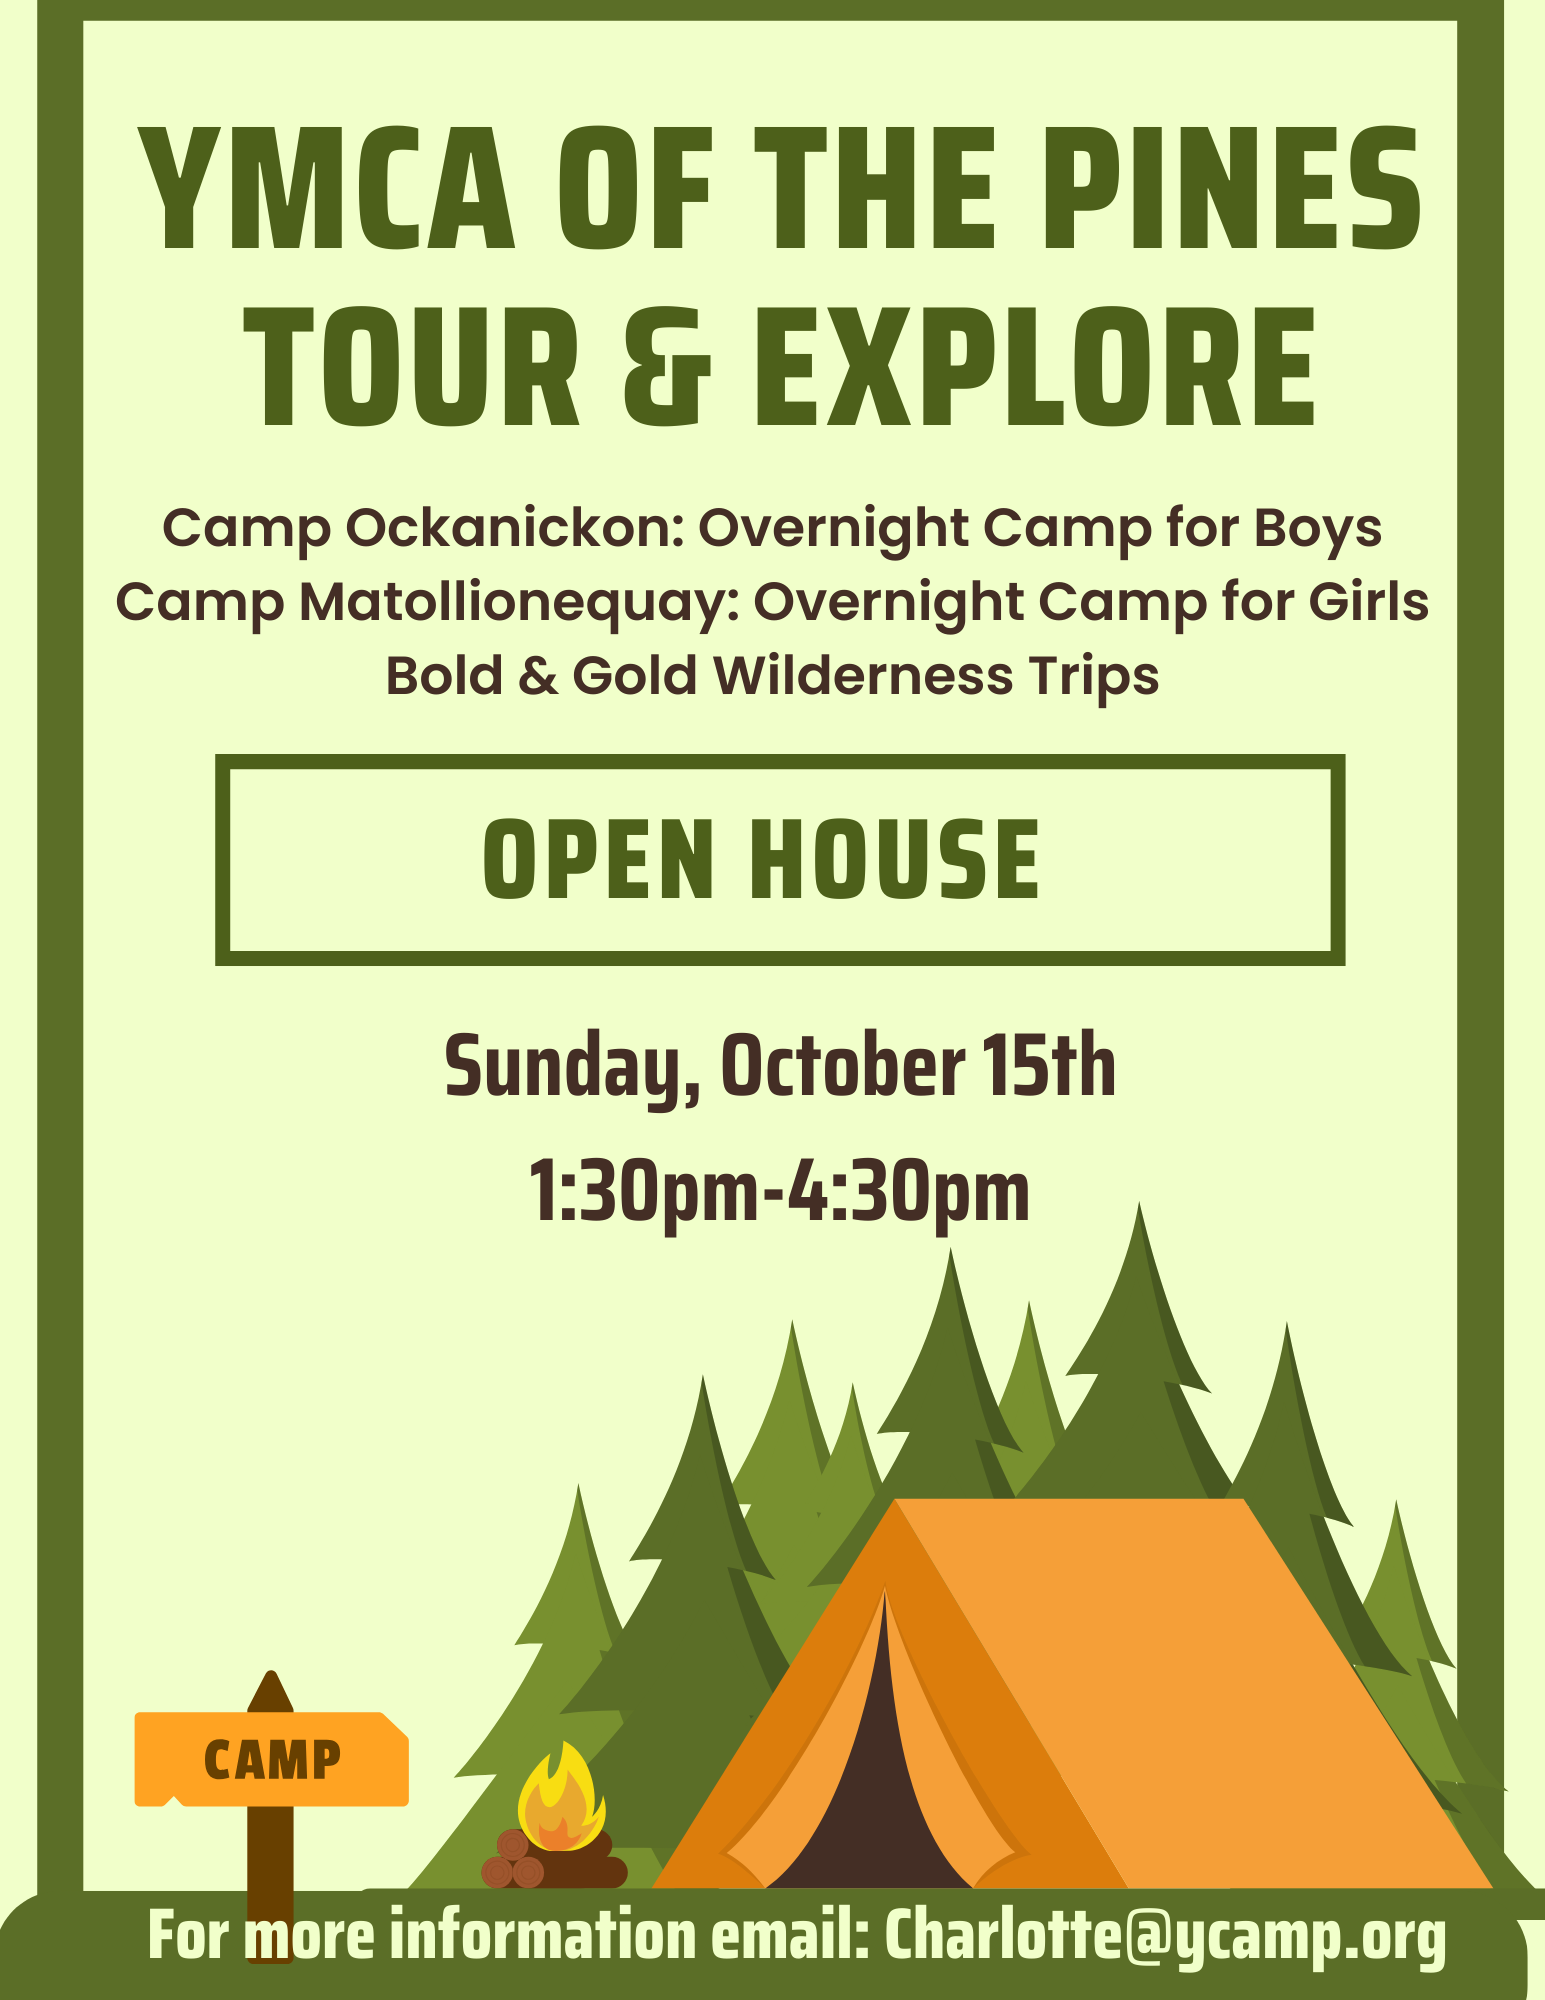 Open House - Overnight Camps and Wilderness Trips @ YMCA of the Pines | Medford | New Jersey | United States